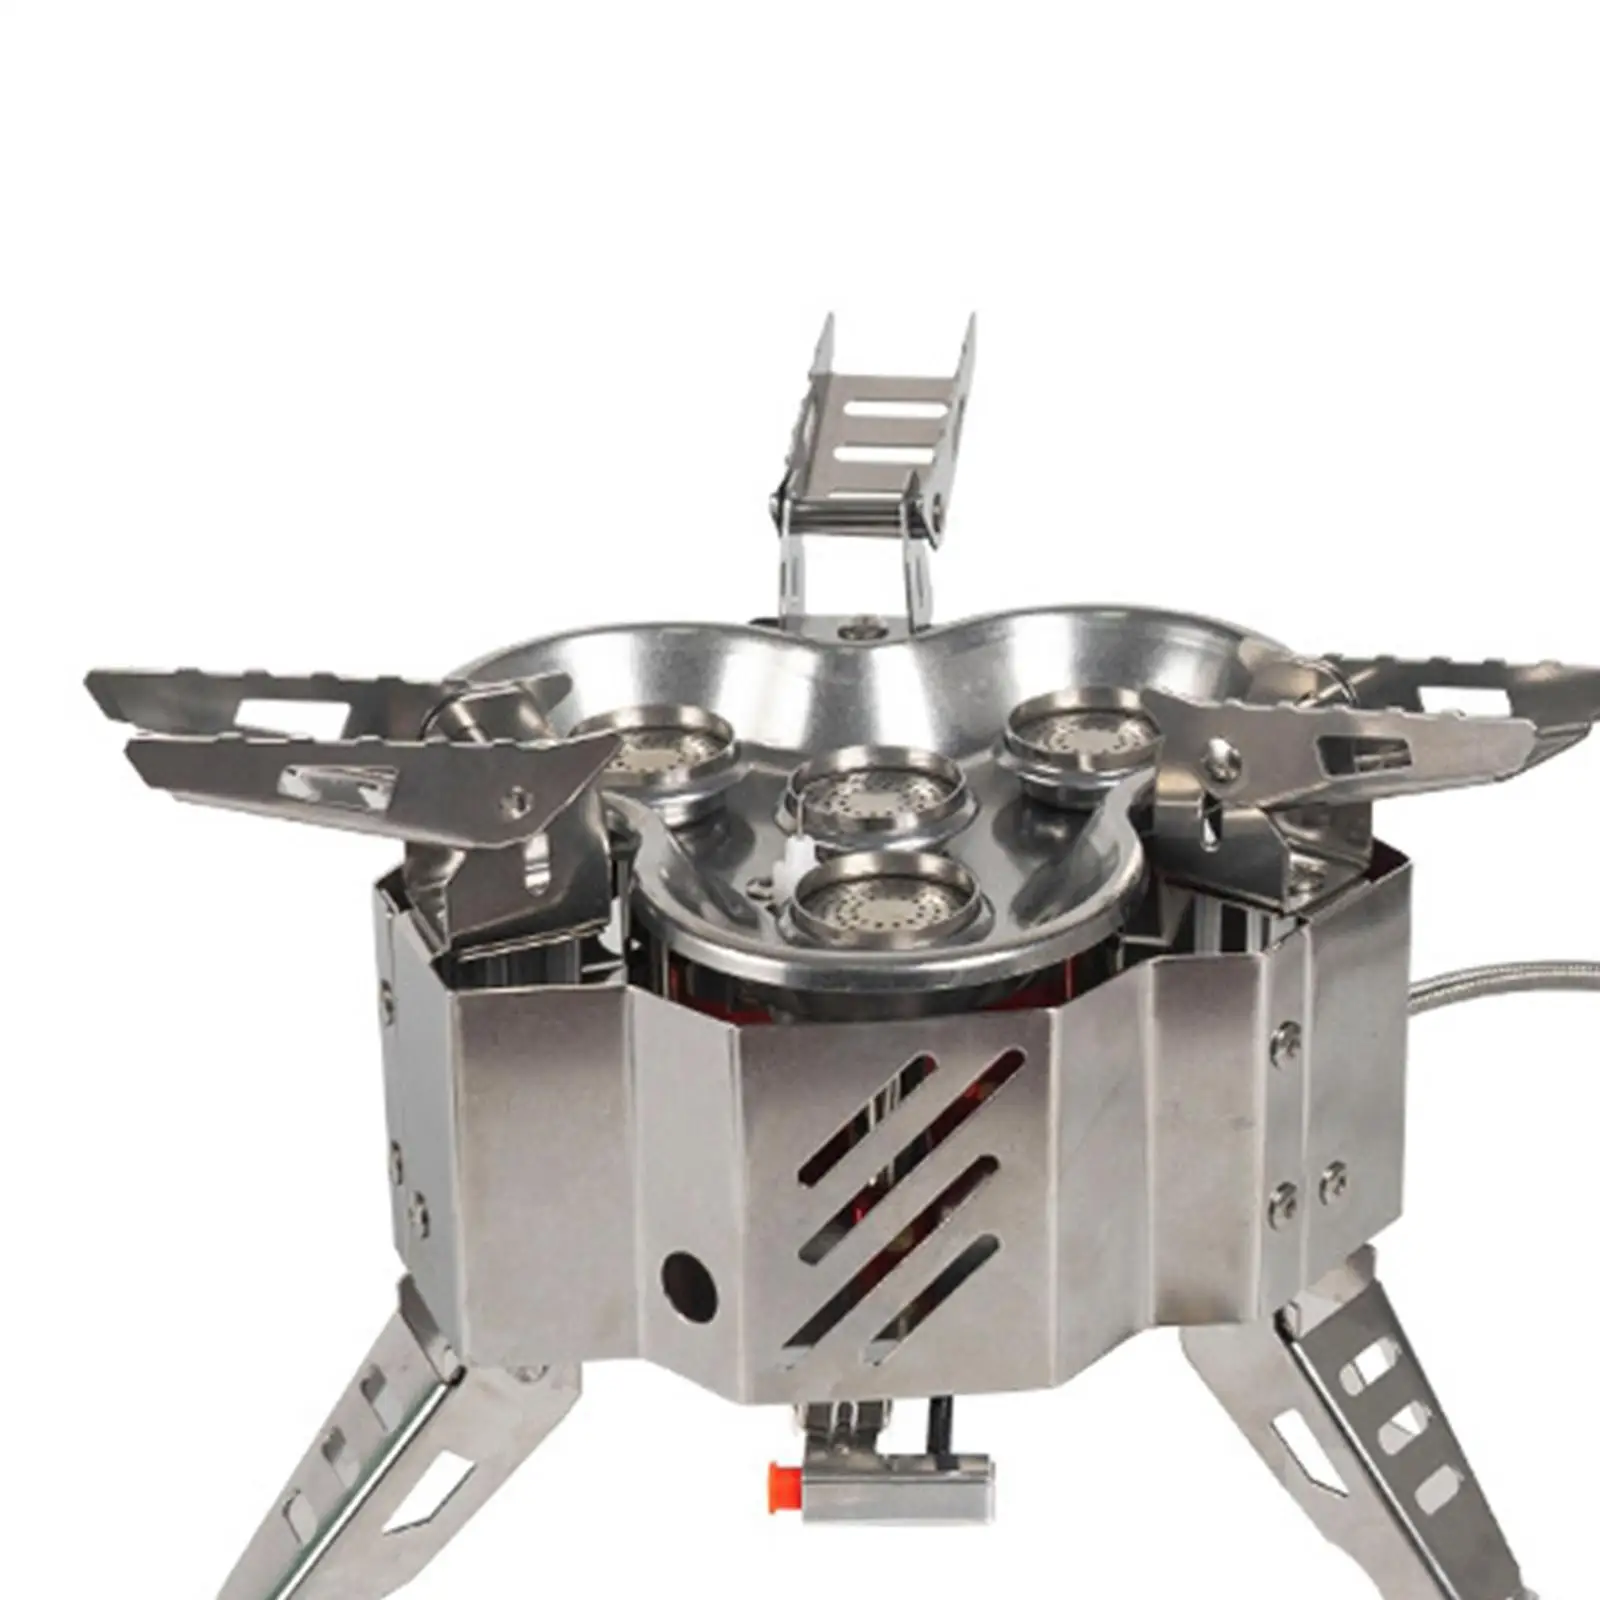 Portable Camping Gas Stove with Carrying Case Ultralight Windproof Stove Burner Camp Stove for Backpacking Hiking Outdoor Picnic